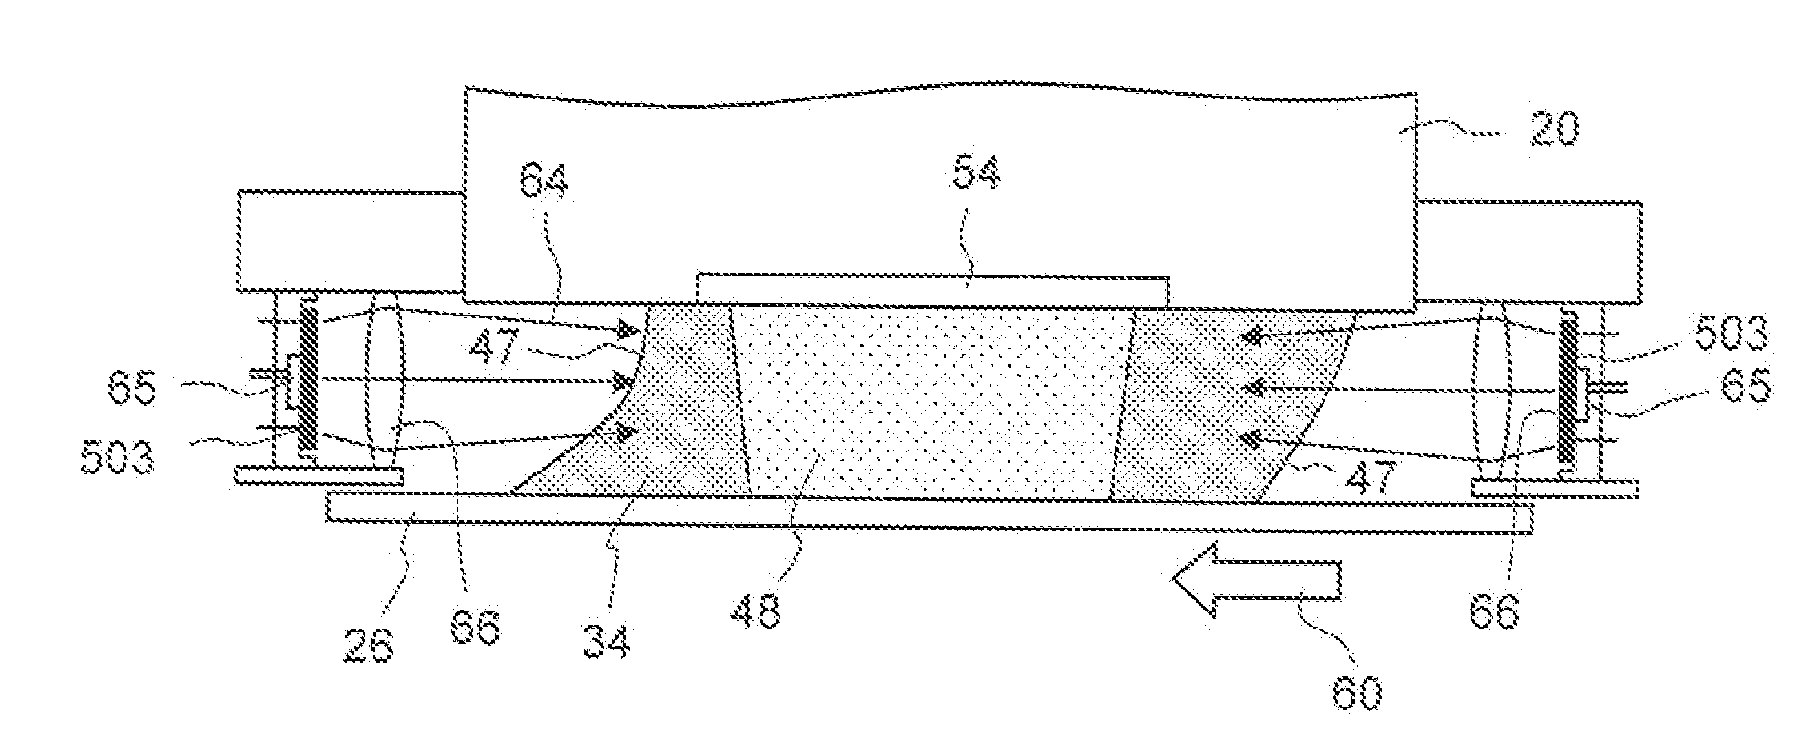 Exposure apparatus and measuring device for a projection lens